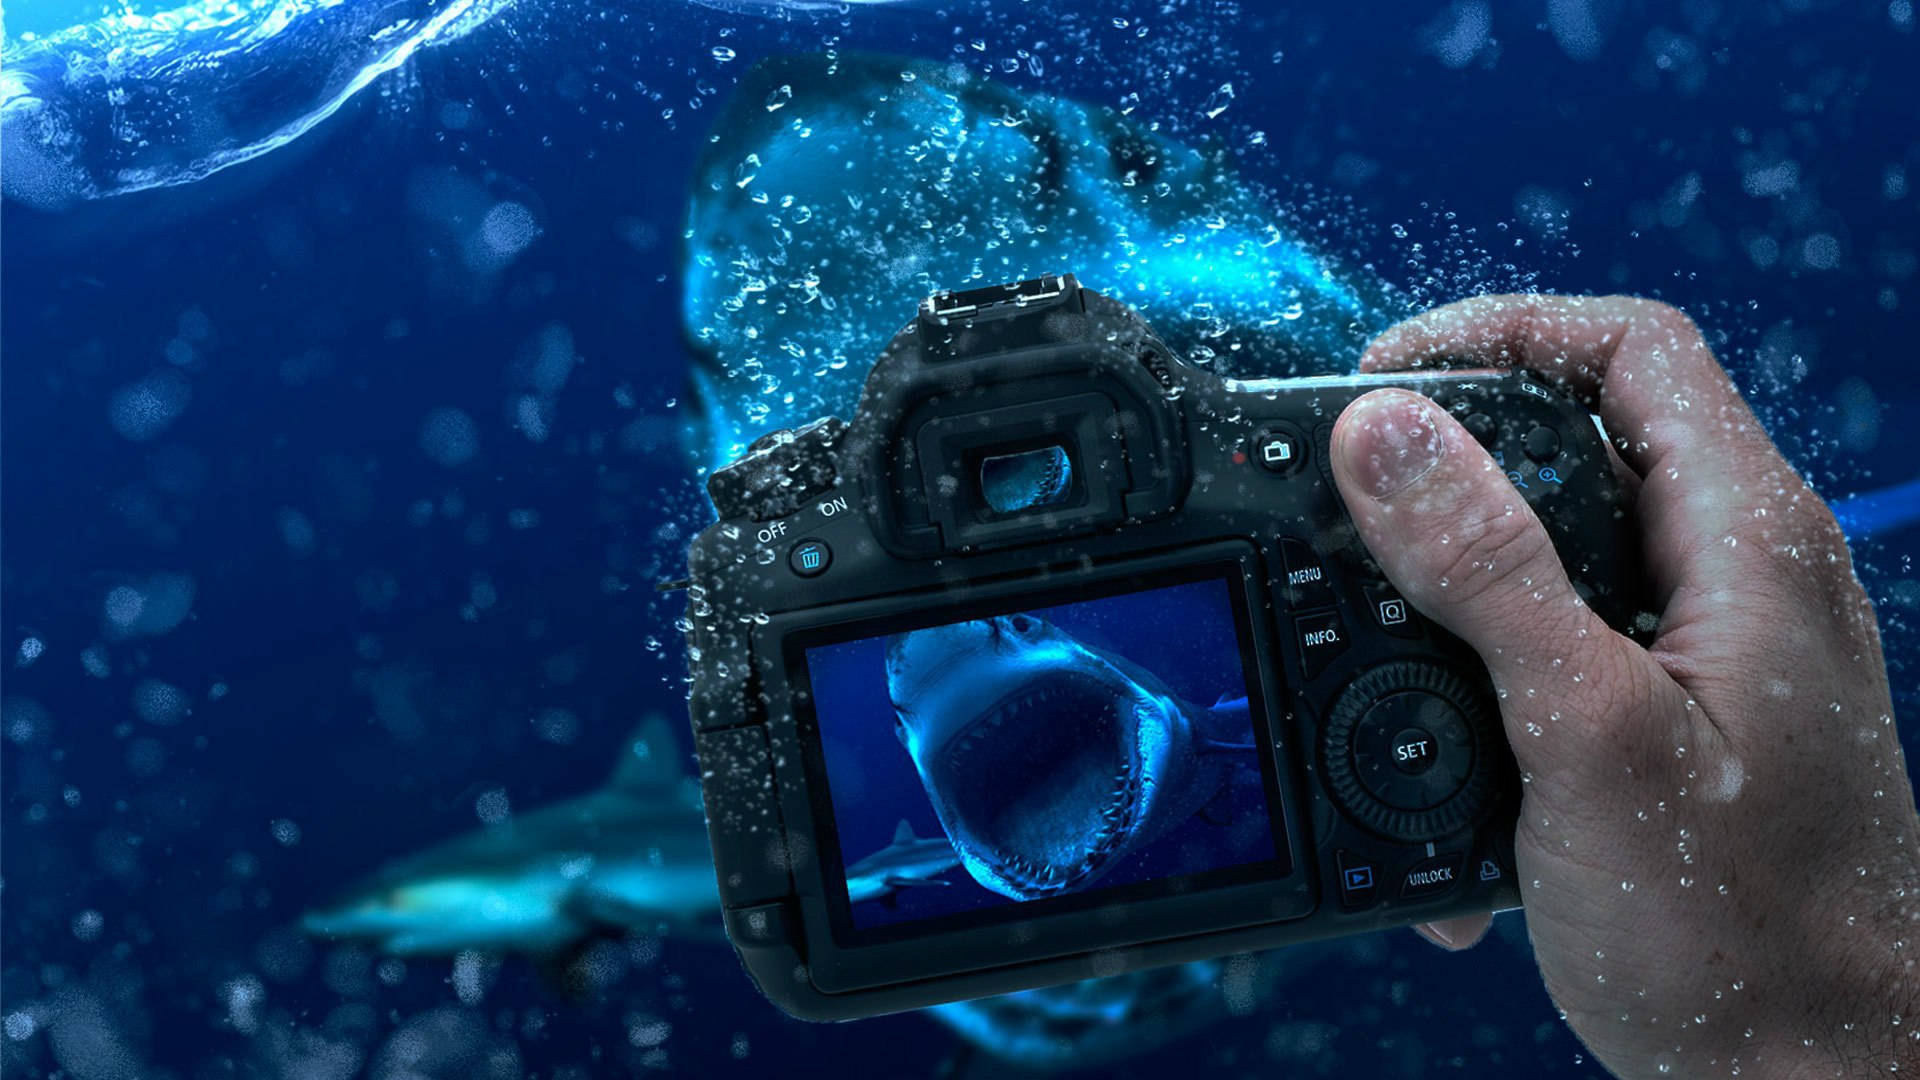 Hd Camera Underwater With Sharks Wallpaper